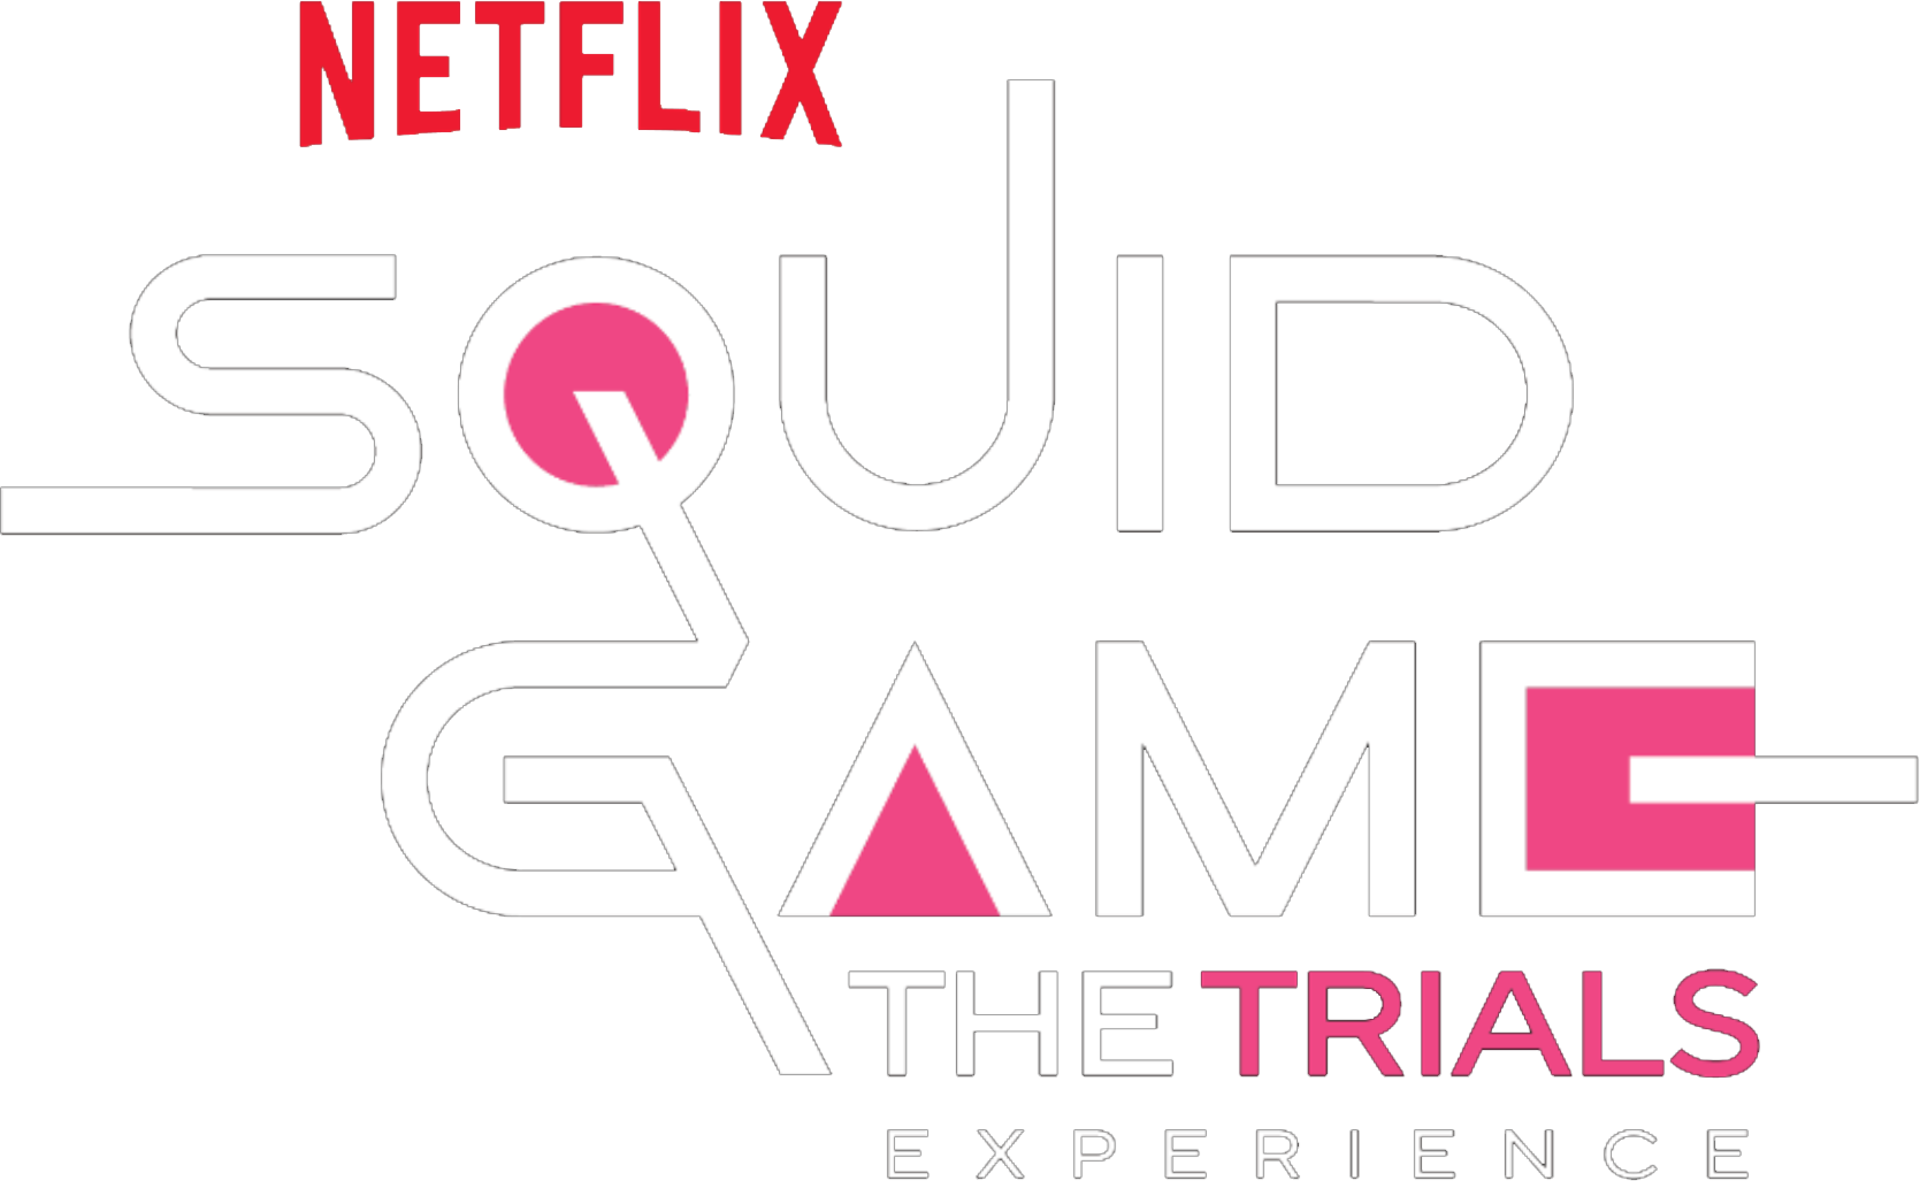 Netflix Set to Debut Real-Life 'Squid Game' Trials - Inside the Magic